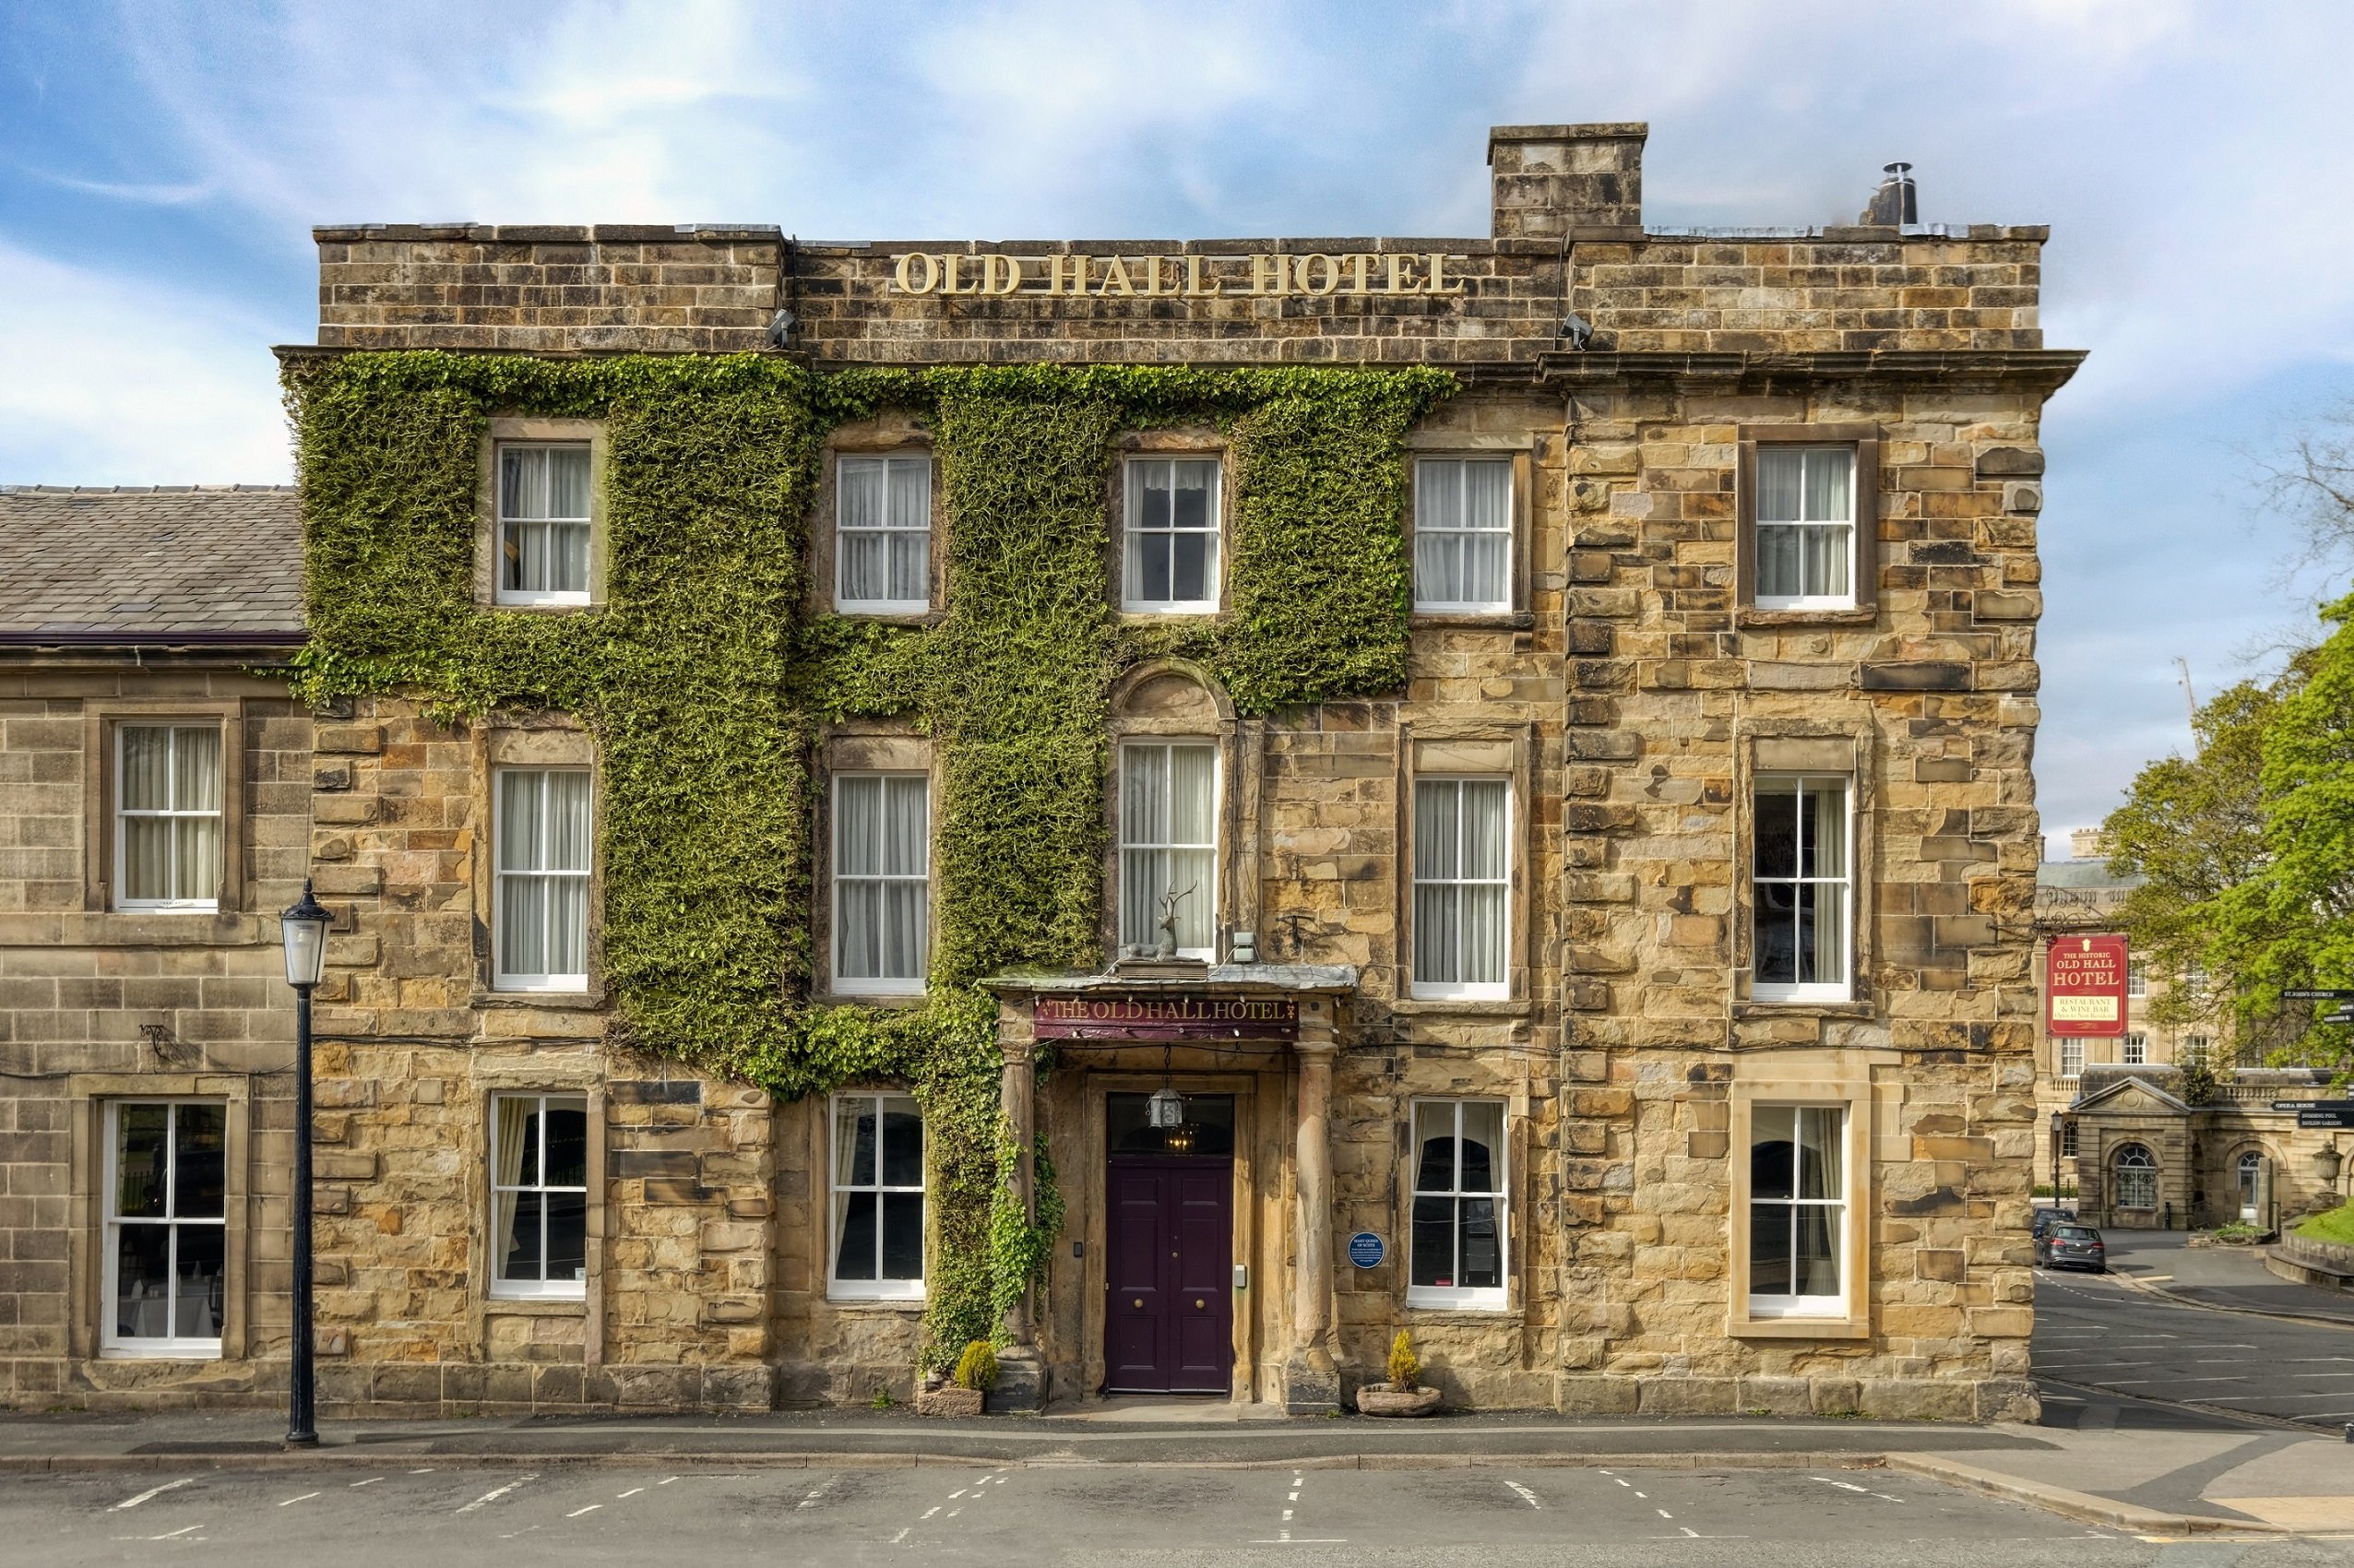 The Old Hall Hotel image